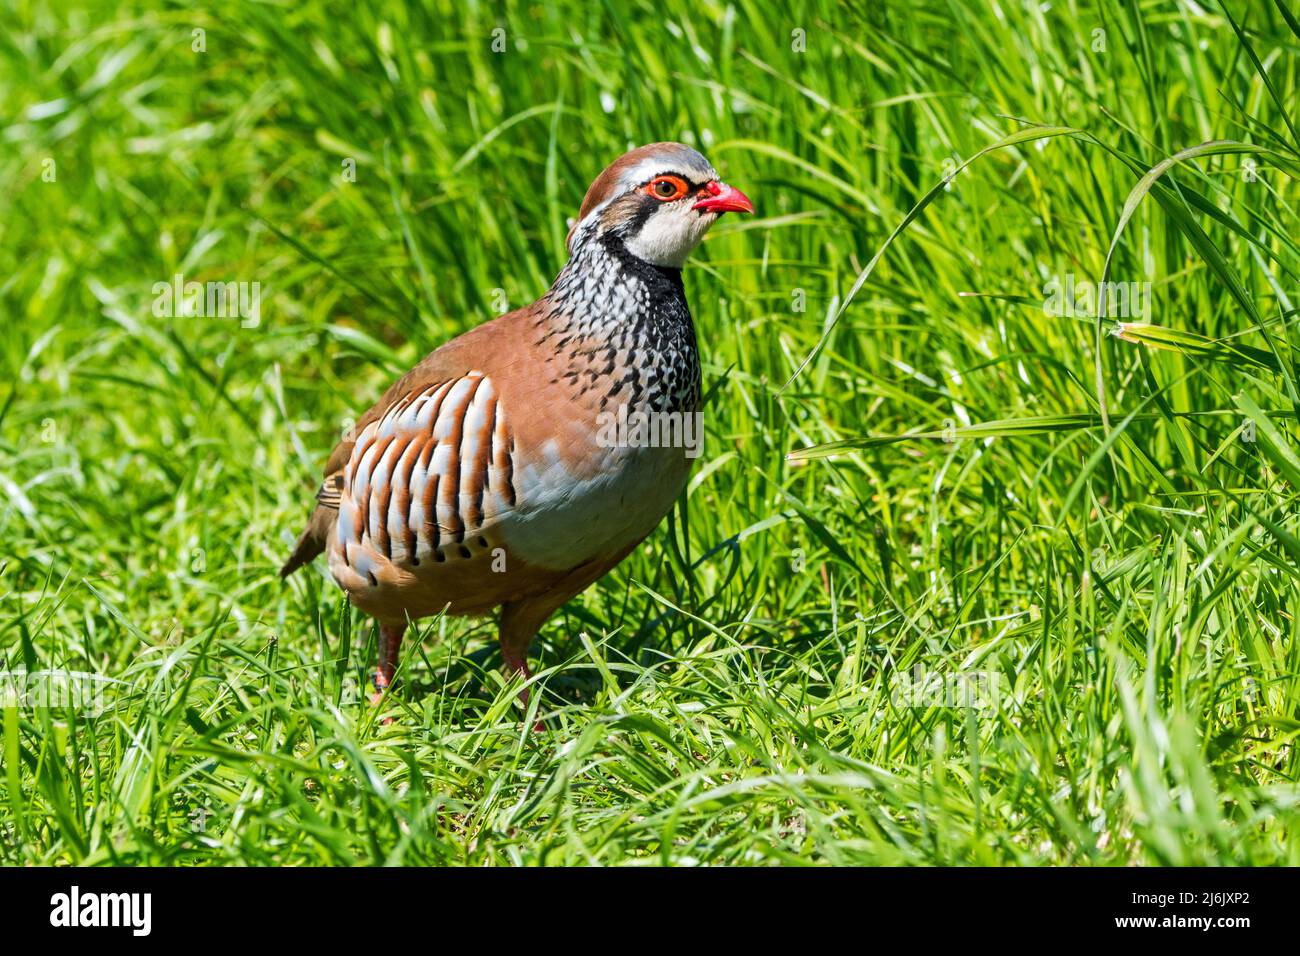 Red-legged partridge / French partridge (Alectoris rufa) foraging in meadow / grassland Stock Photo